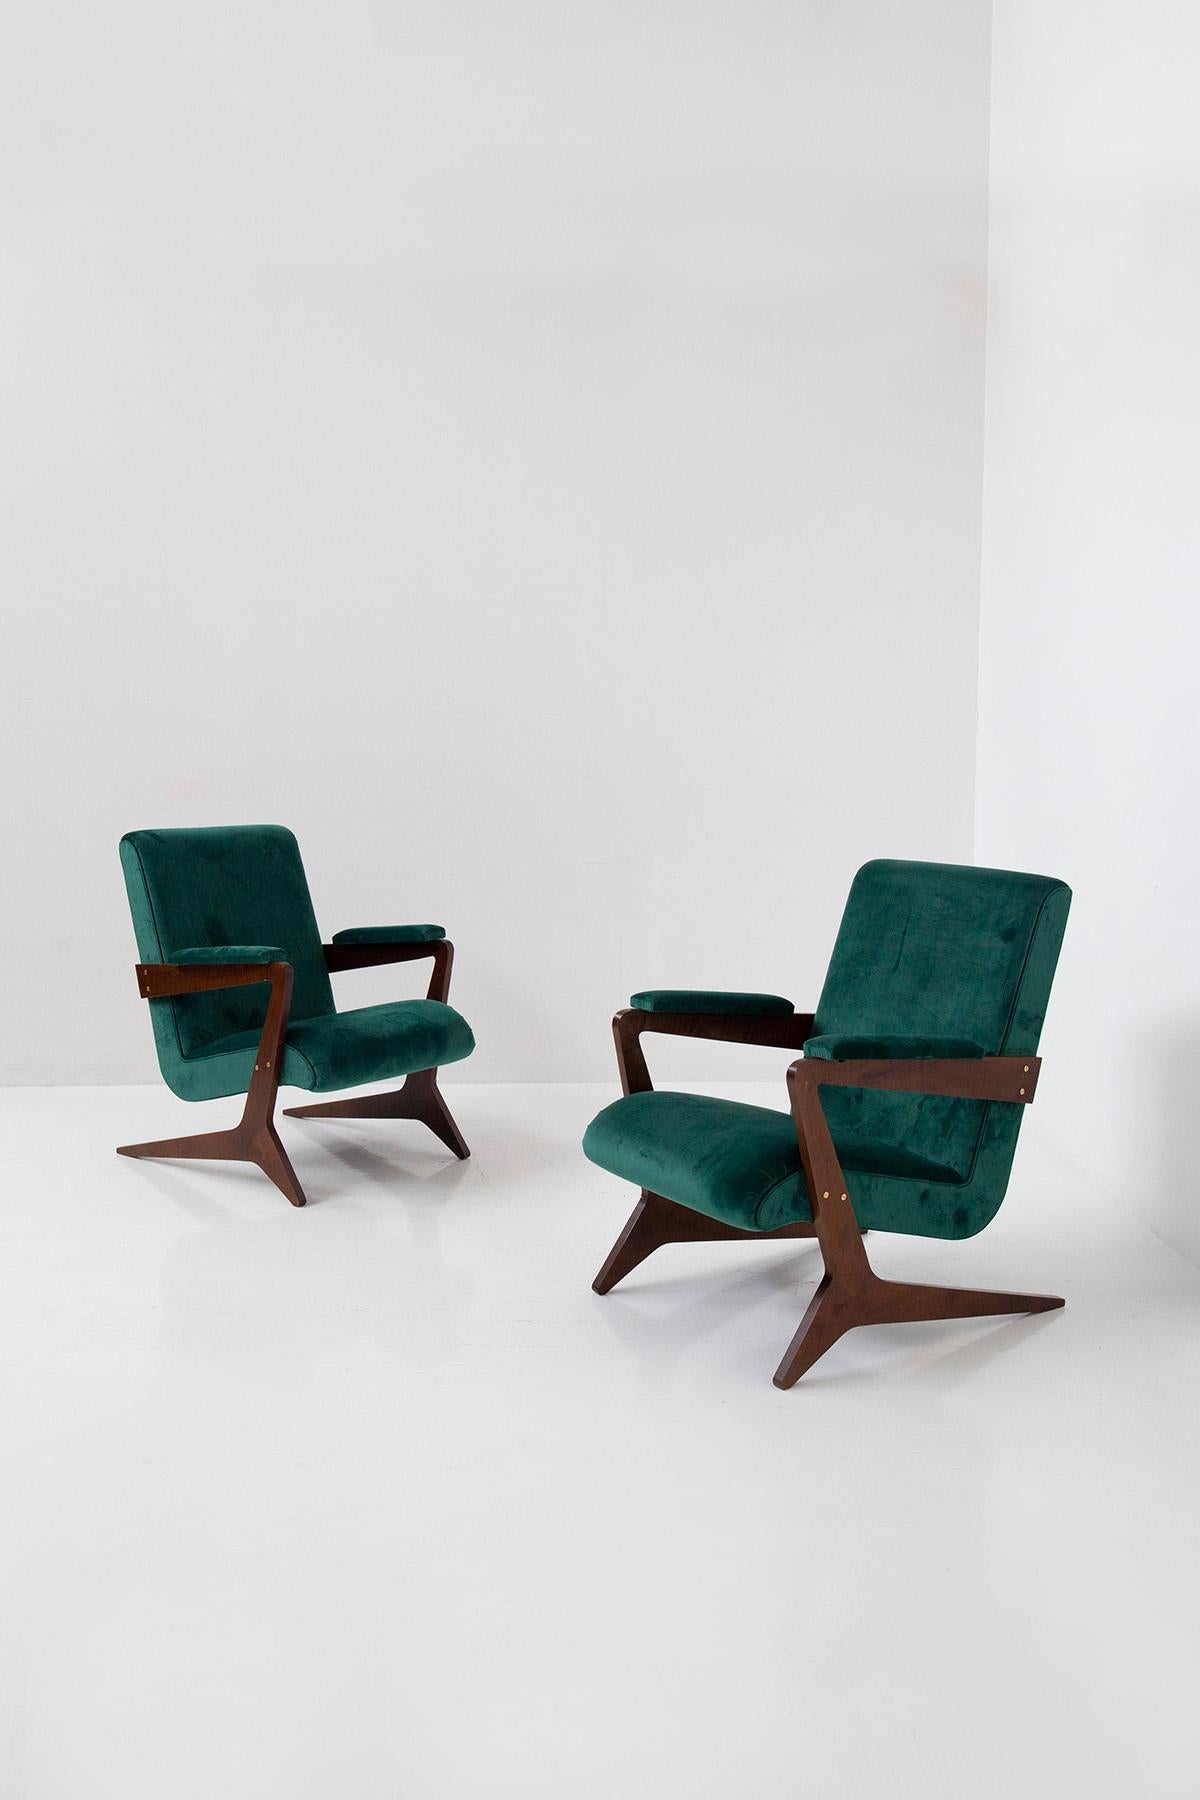 ransport yourself to the vibrant heart of 20th-century Brazil with this captivating pair of Brazilian Geometric armchairs, an embodiment of modernity and geometric elegance. Crafted with precision and flair, these chairs stand as a testament to the